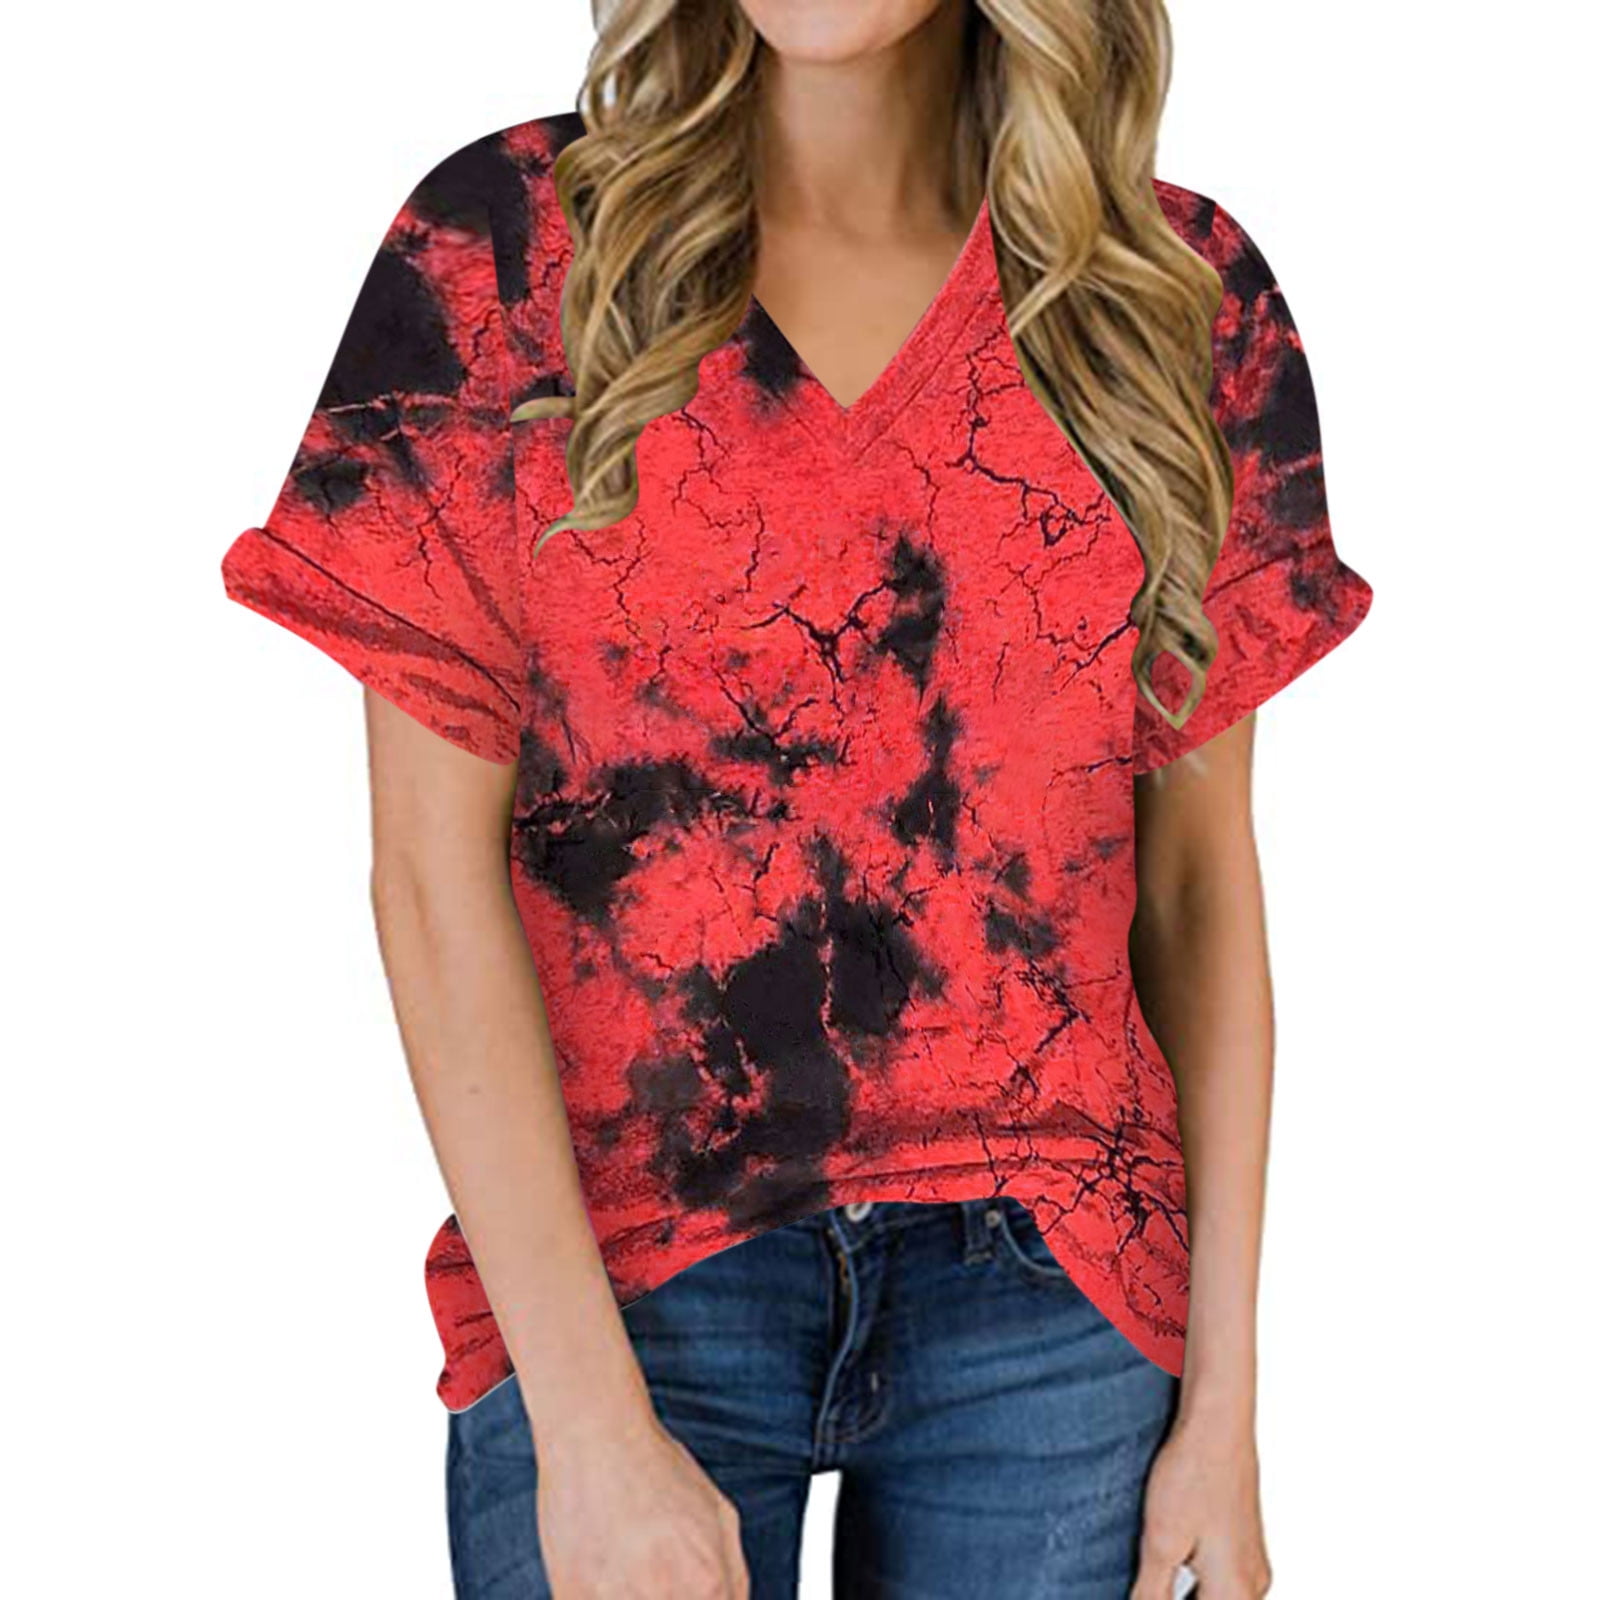 Tie-dye Casual Tees Shirt for Women V-neck Tunic Top Fashion Printed  Workwear Summer Soft Comfy Loose Pullovers 